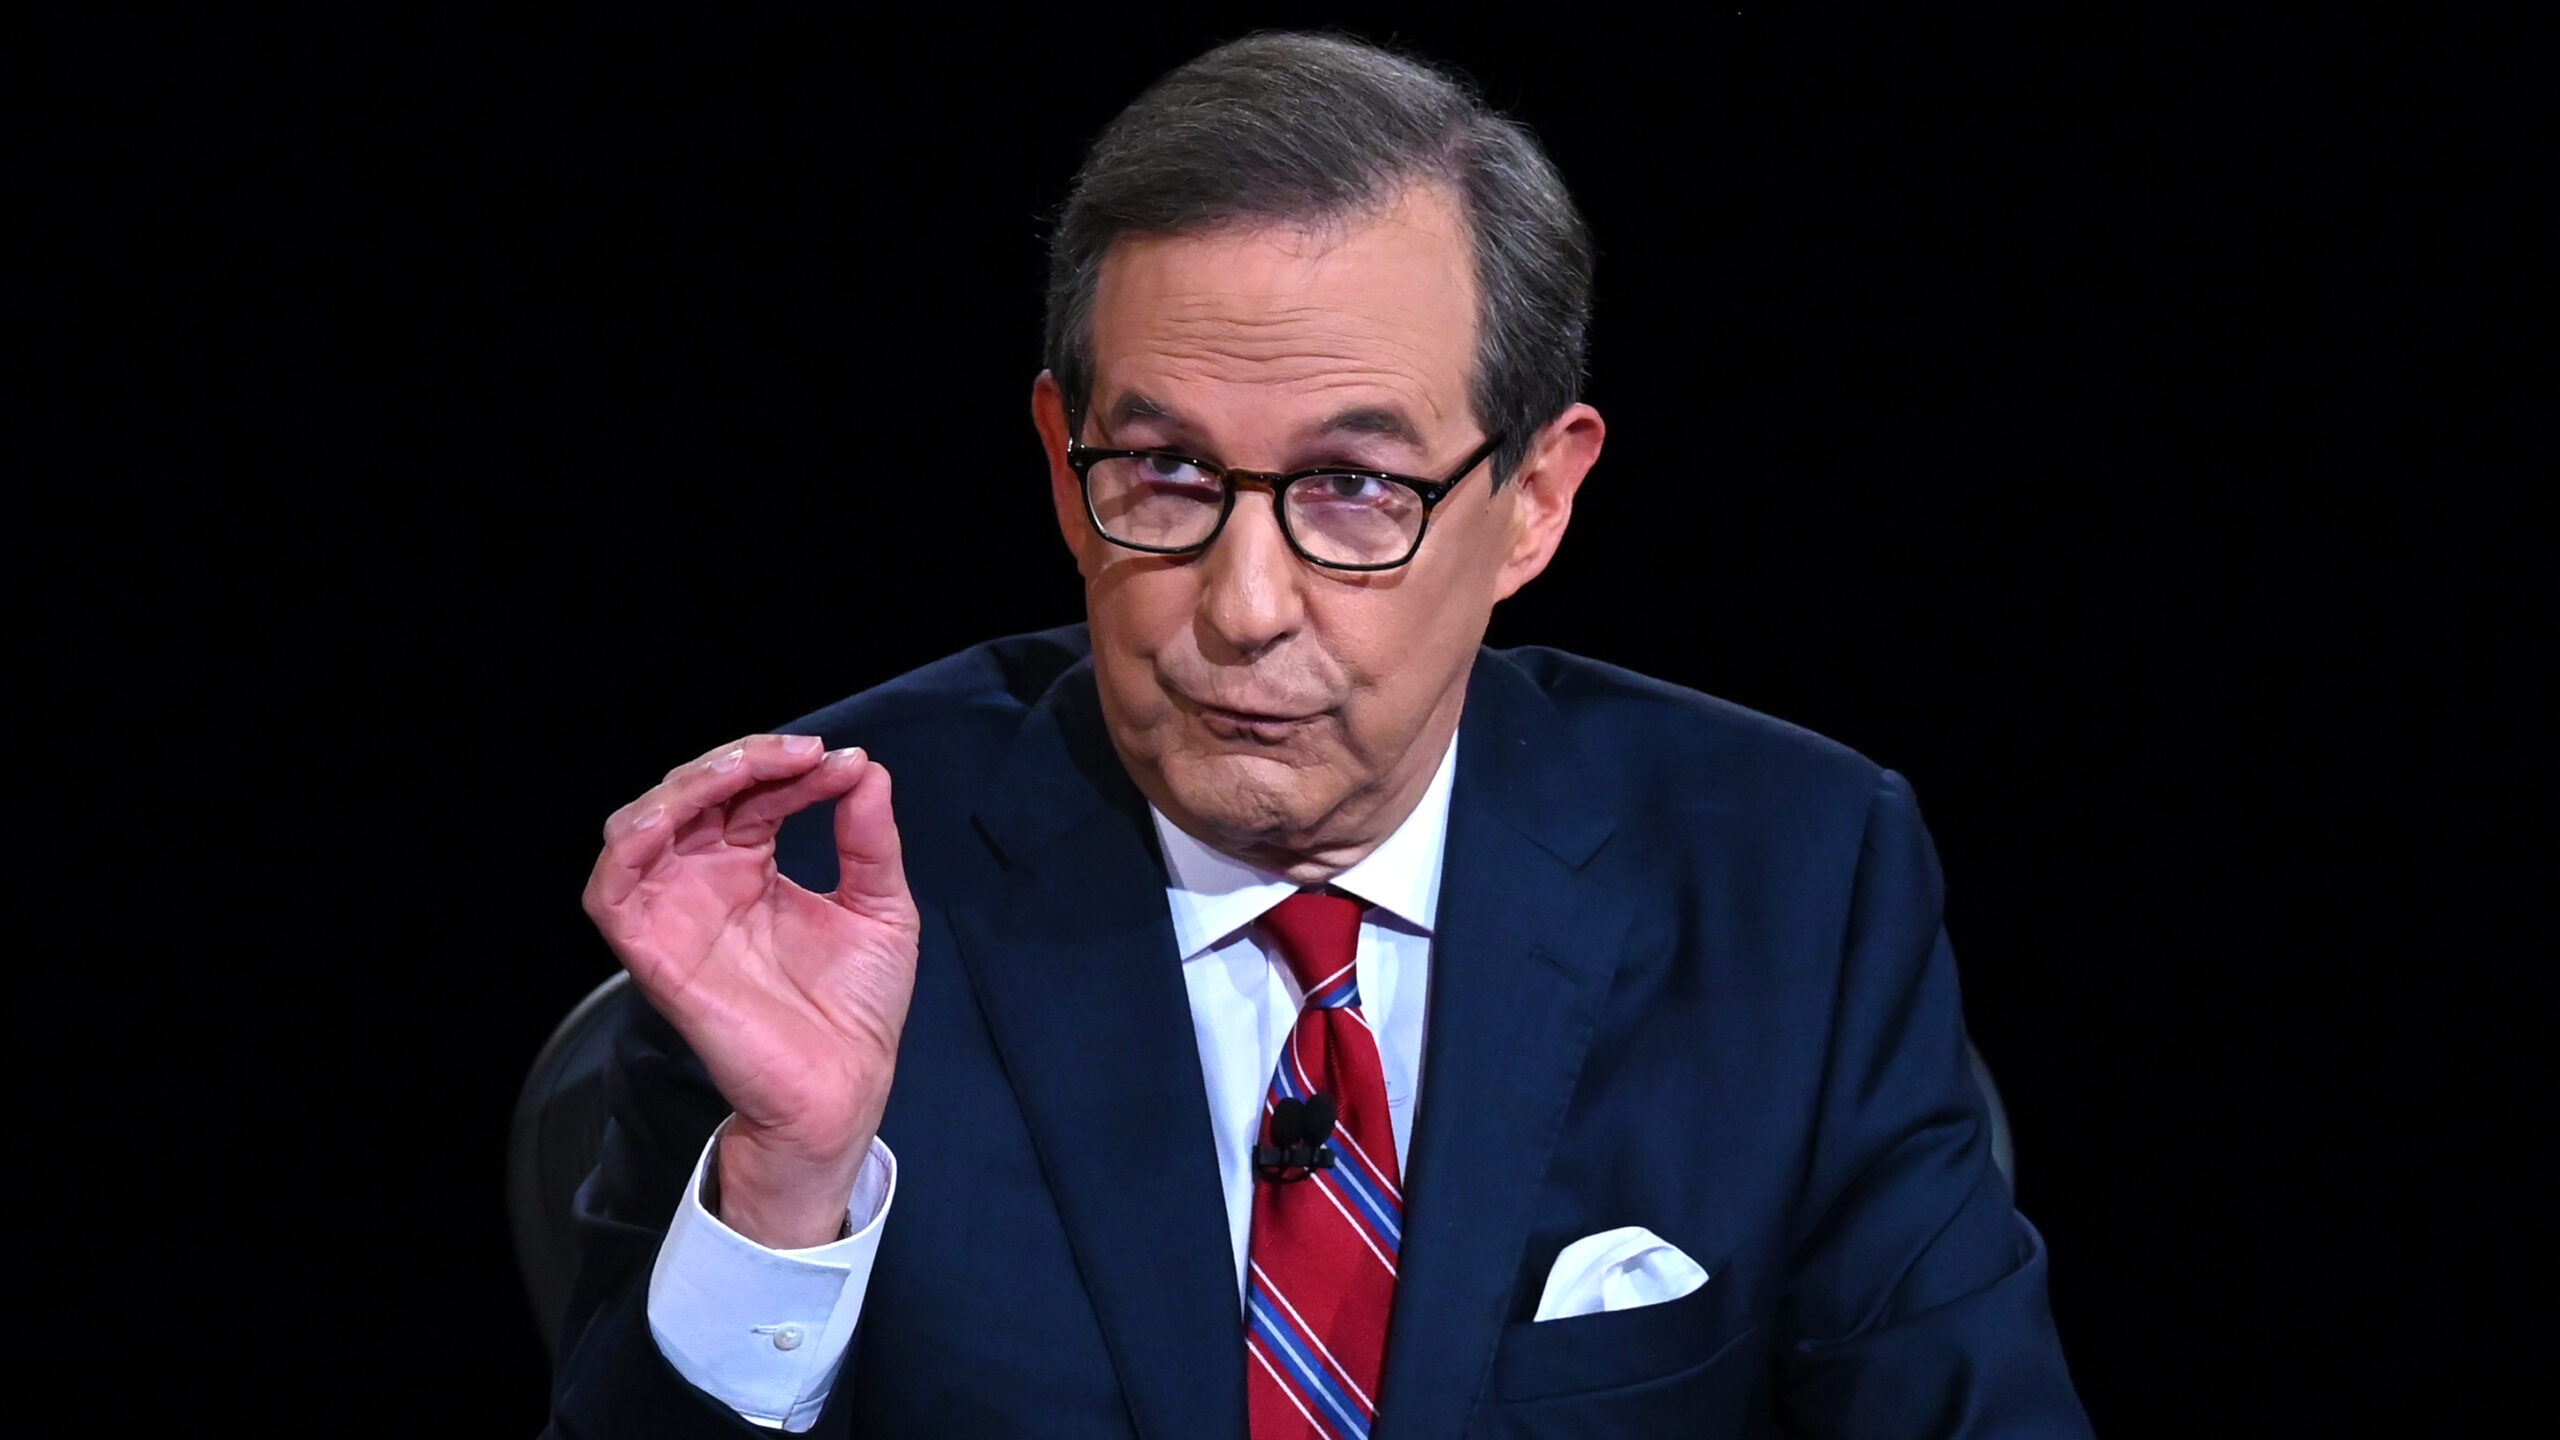 Yikes Shuttering CNN Host Chris Wallace Pushes Producer To Make Project On His Trump Interviews During Show